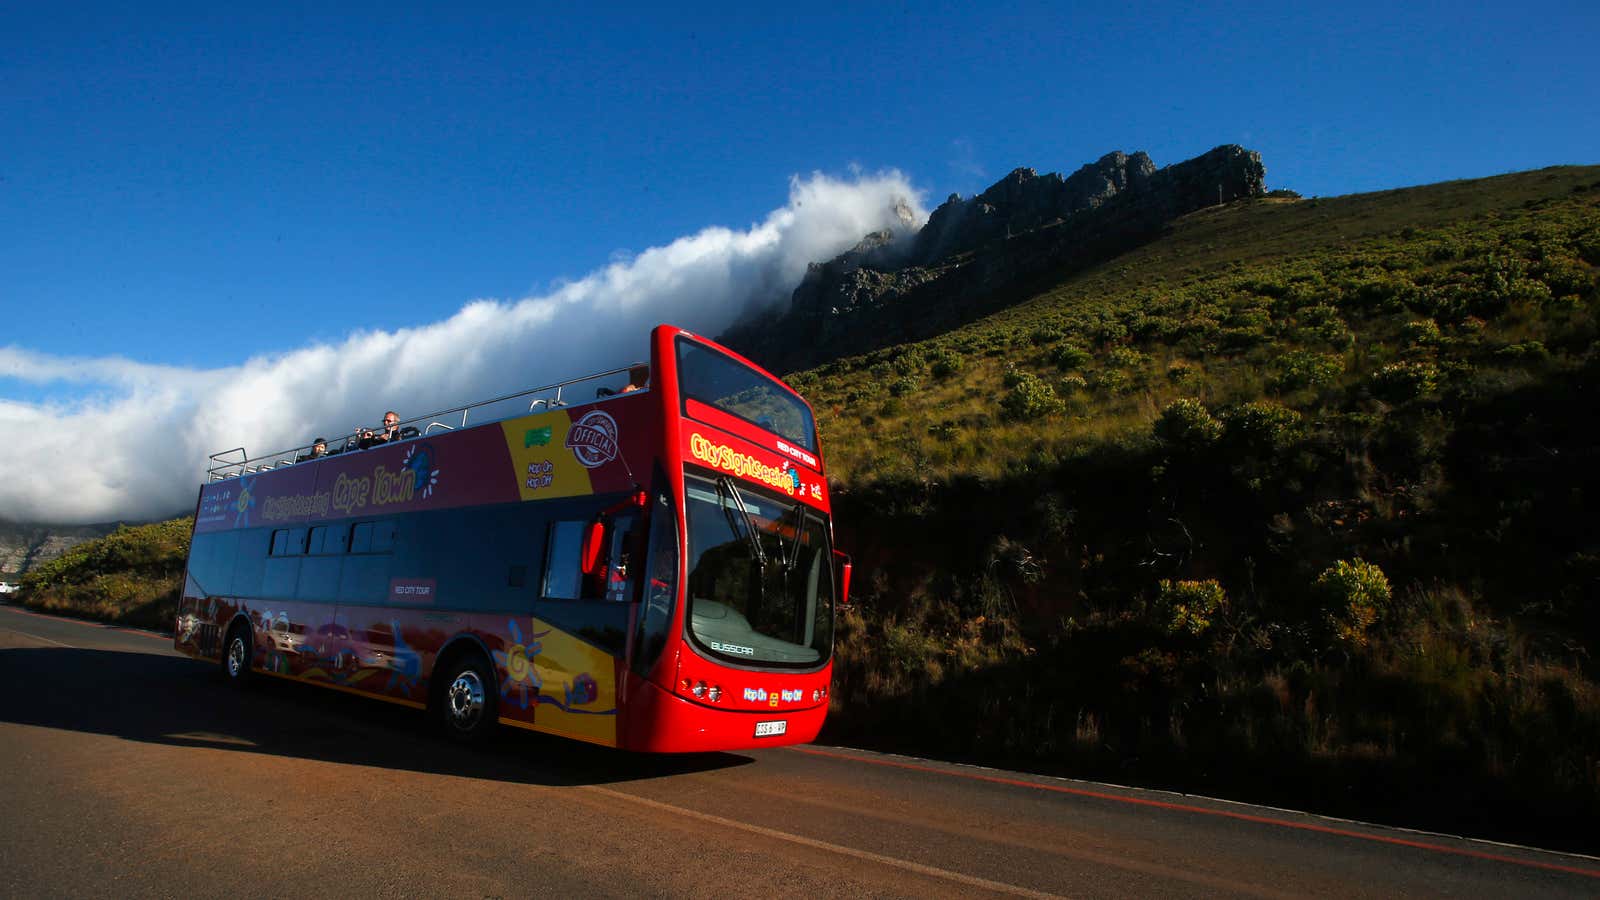 Welcome back: South Africa has missed foreign tourists